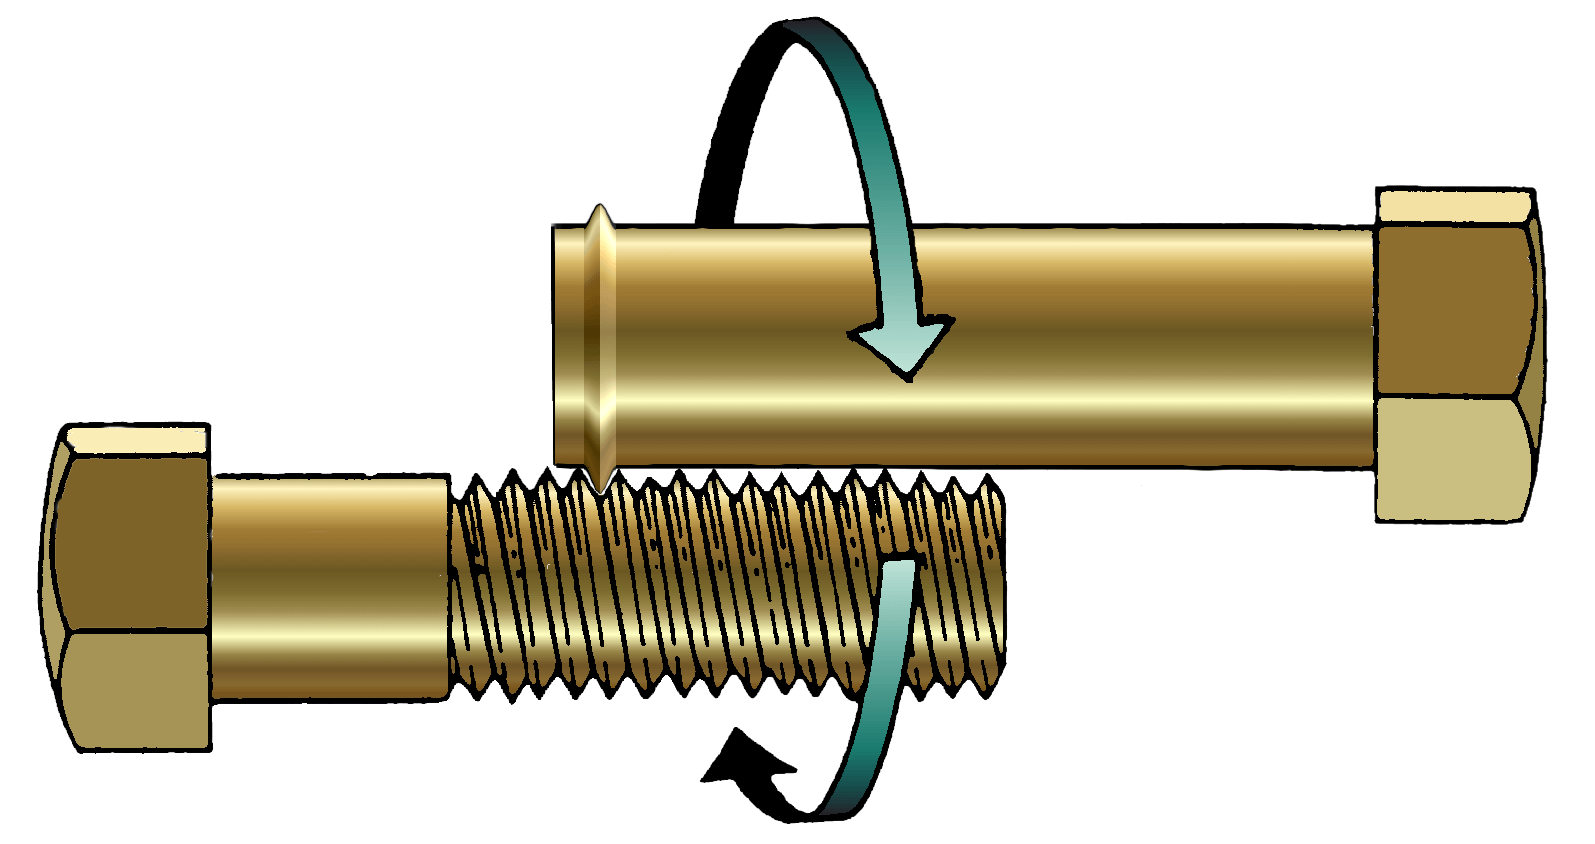 a special bolt with just a flange on the end interlocked with a regular bolt